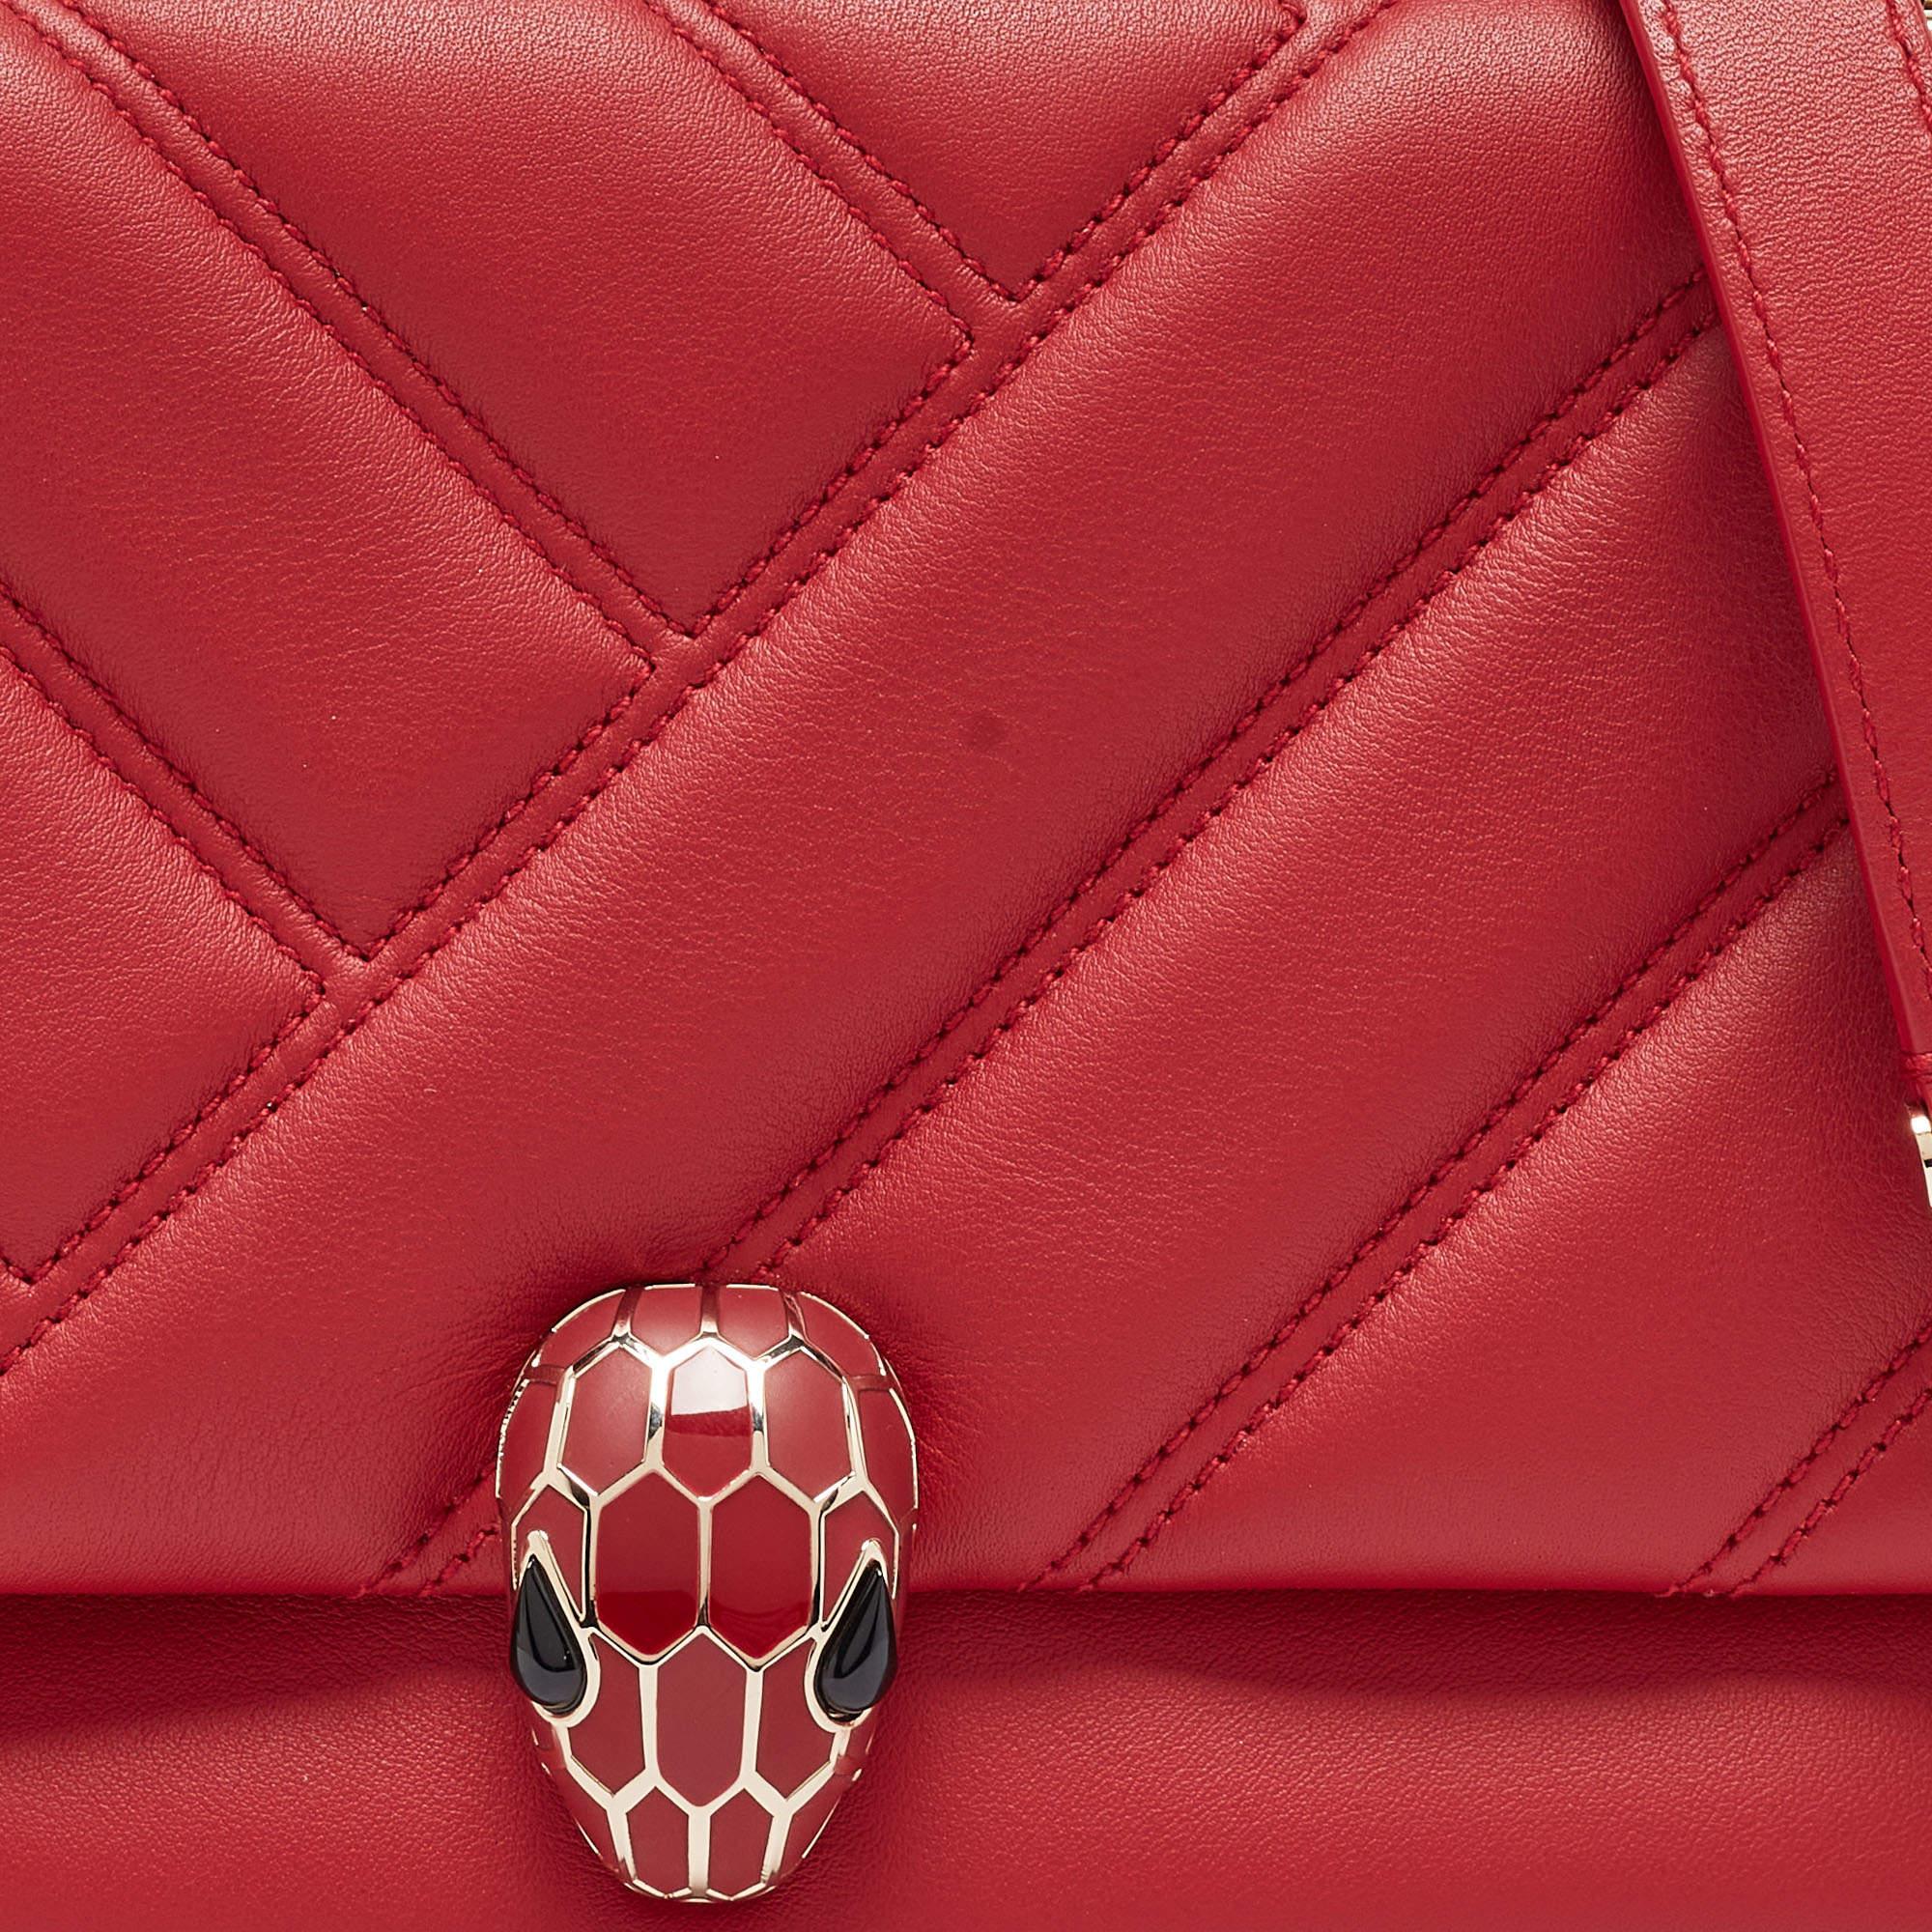 Bvlgari Red Quilted Leather Small Serpenti Cabochon Shoulder Bag 7